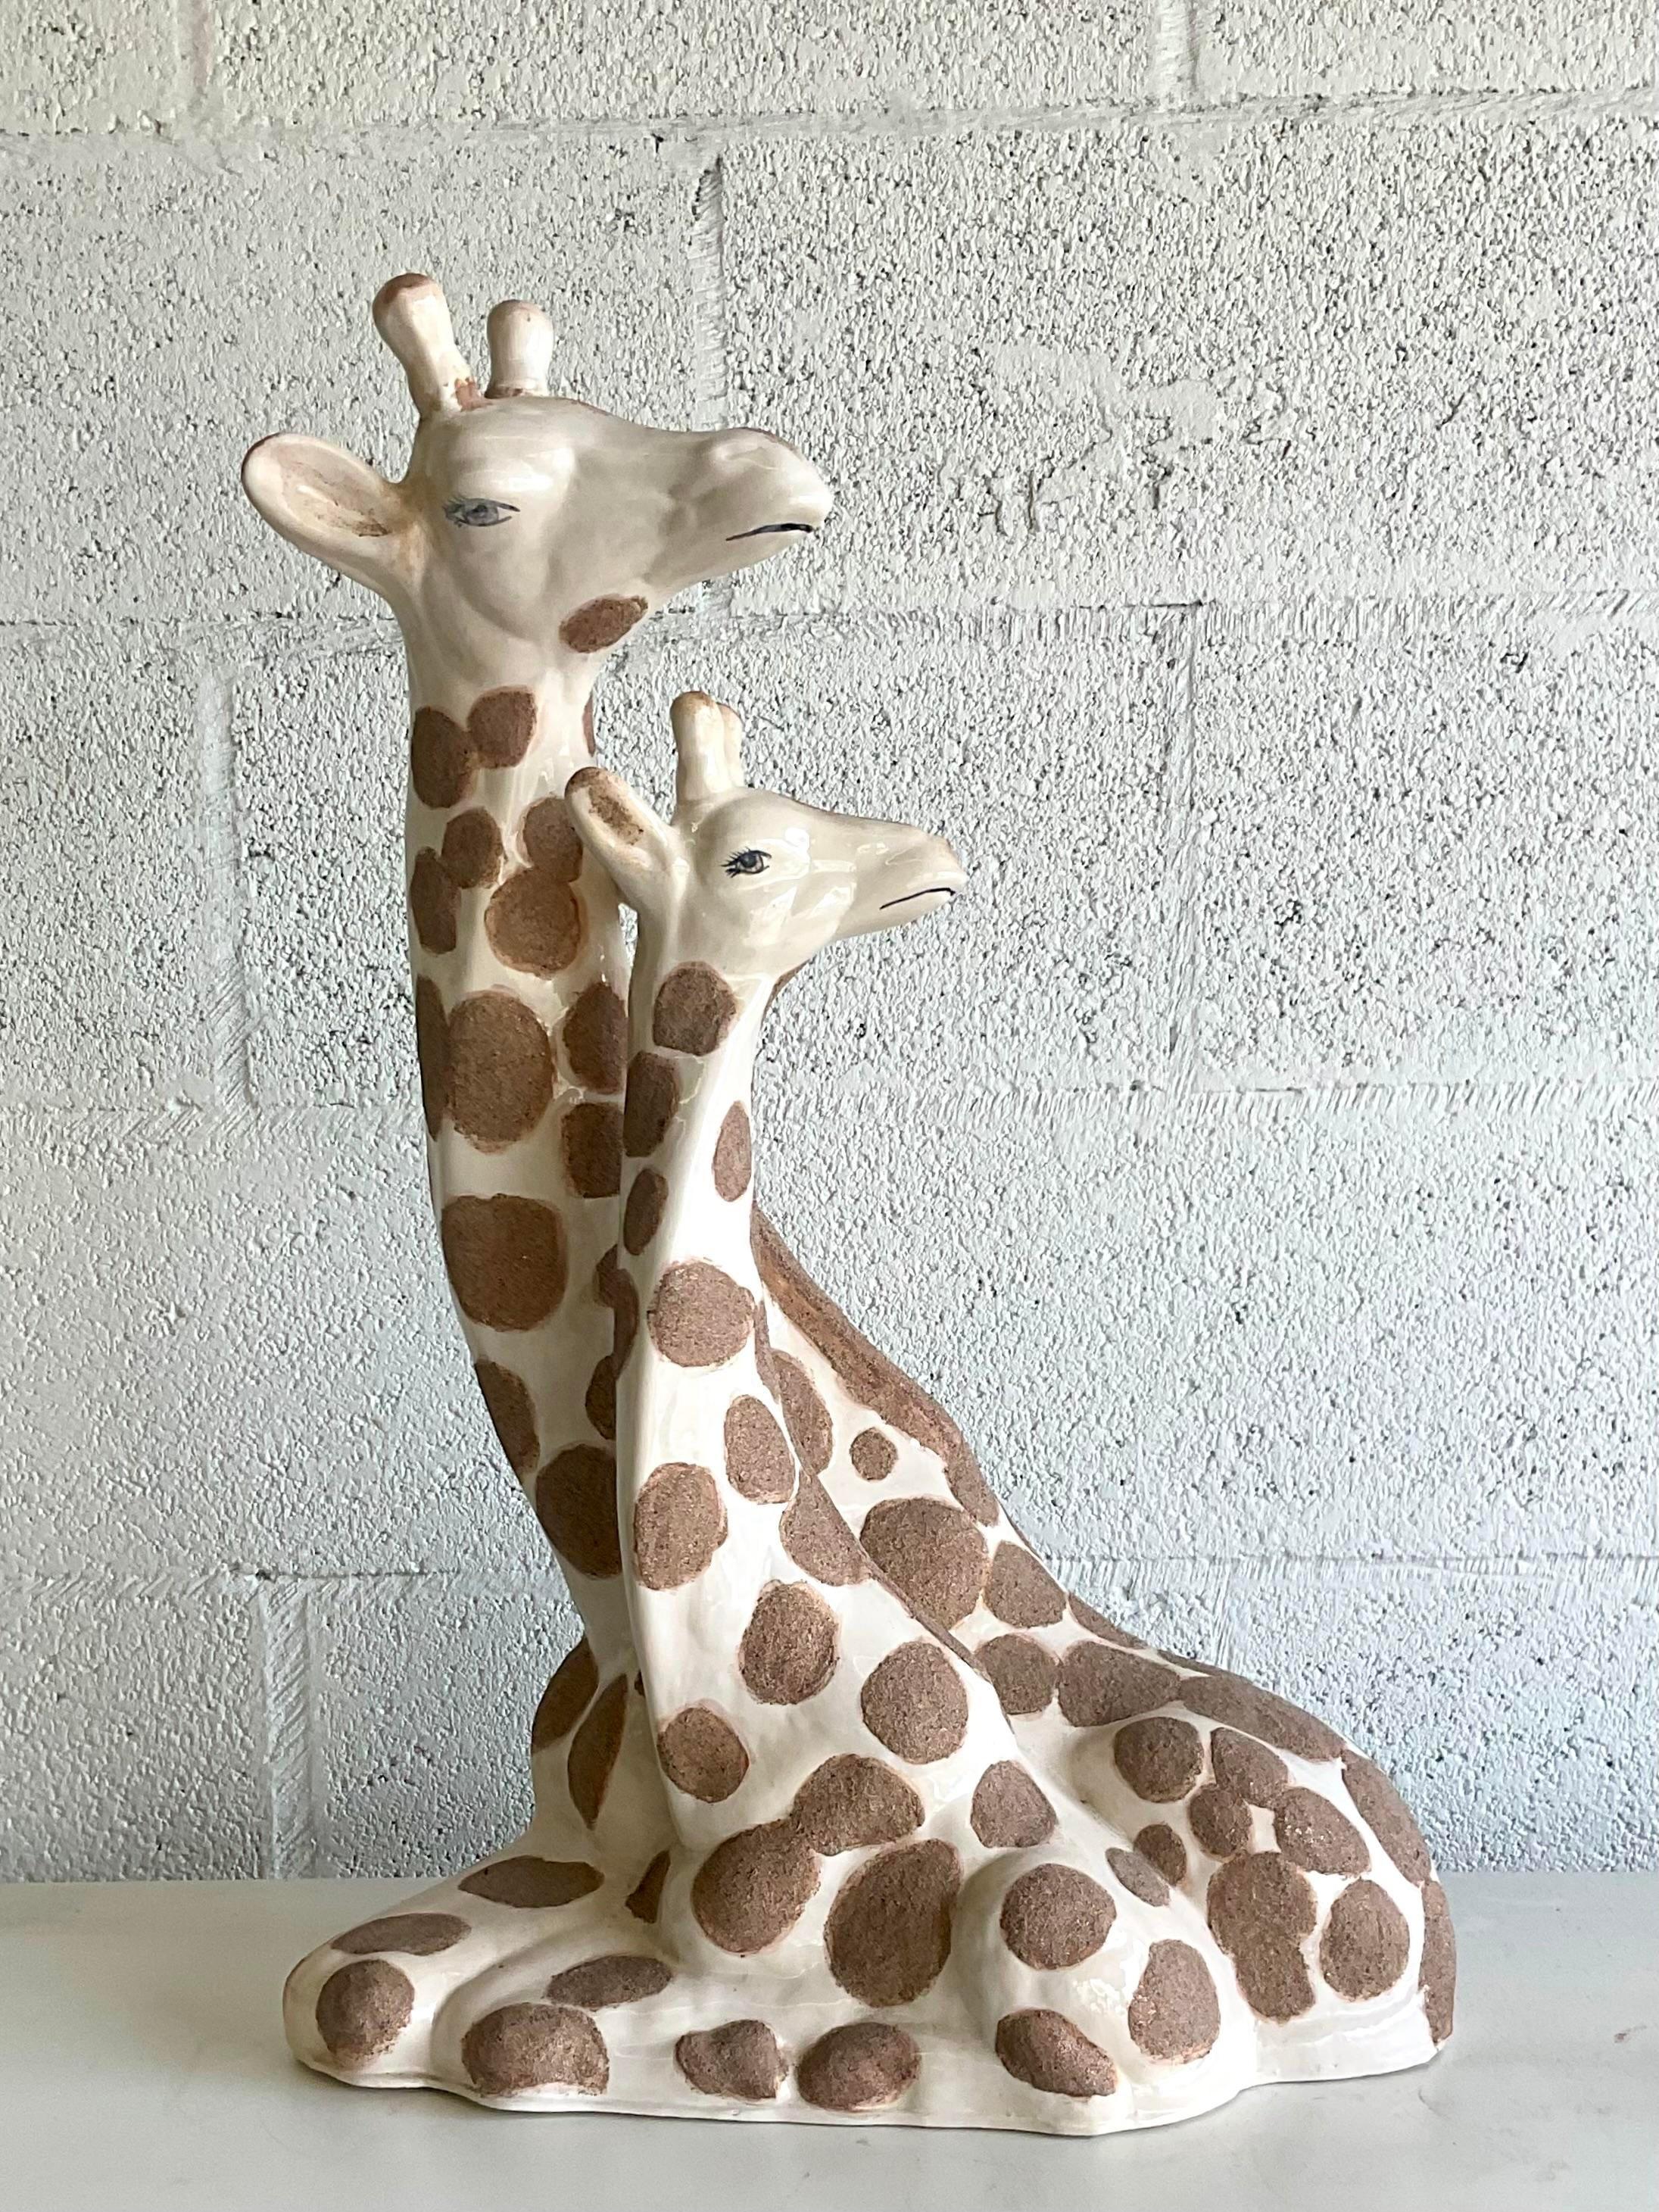 Fabulous vintage MCM giraffes. Beautiful hand painted detail with a textured spots all over the bodies. The giraffes are a single piece. Acquired from a Palm Beach estate. l